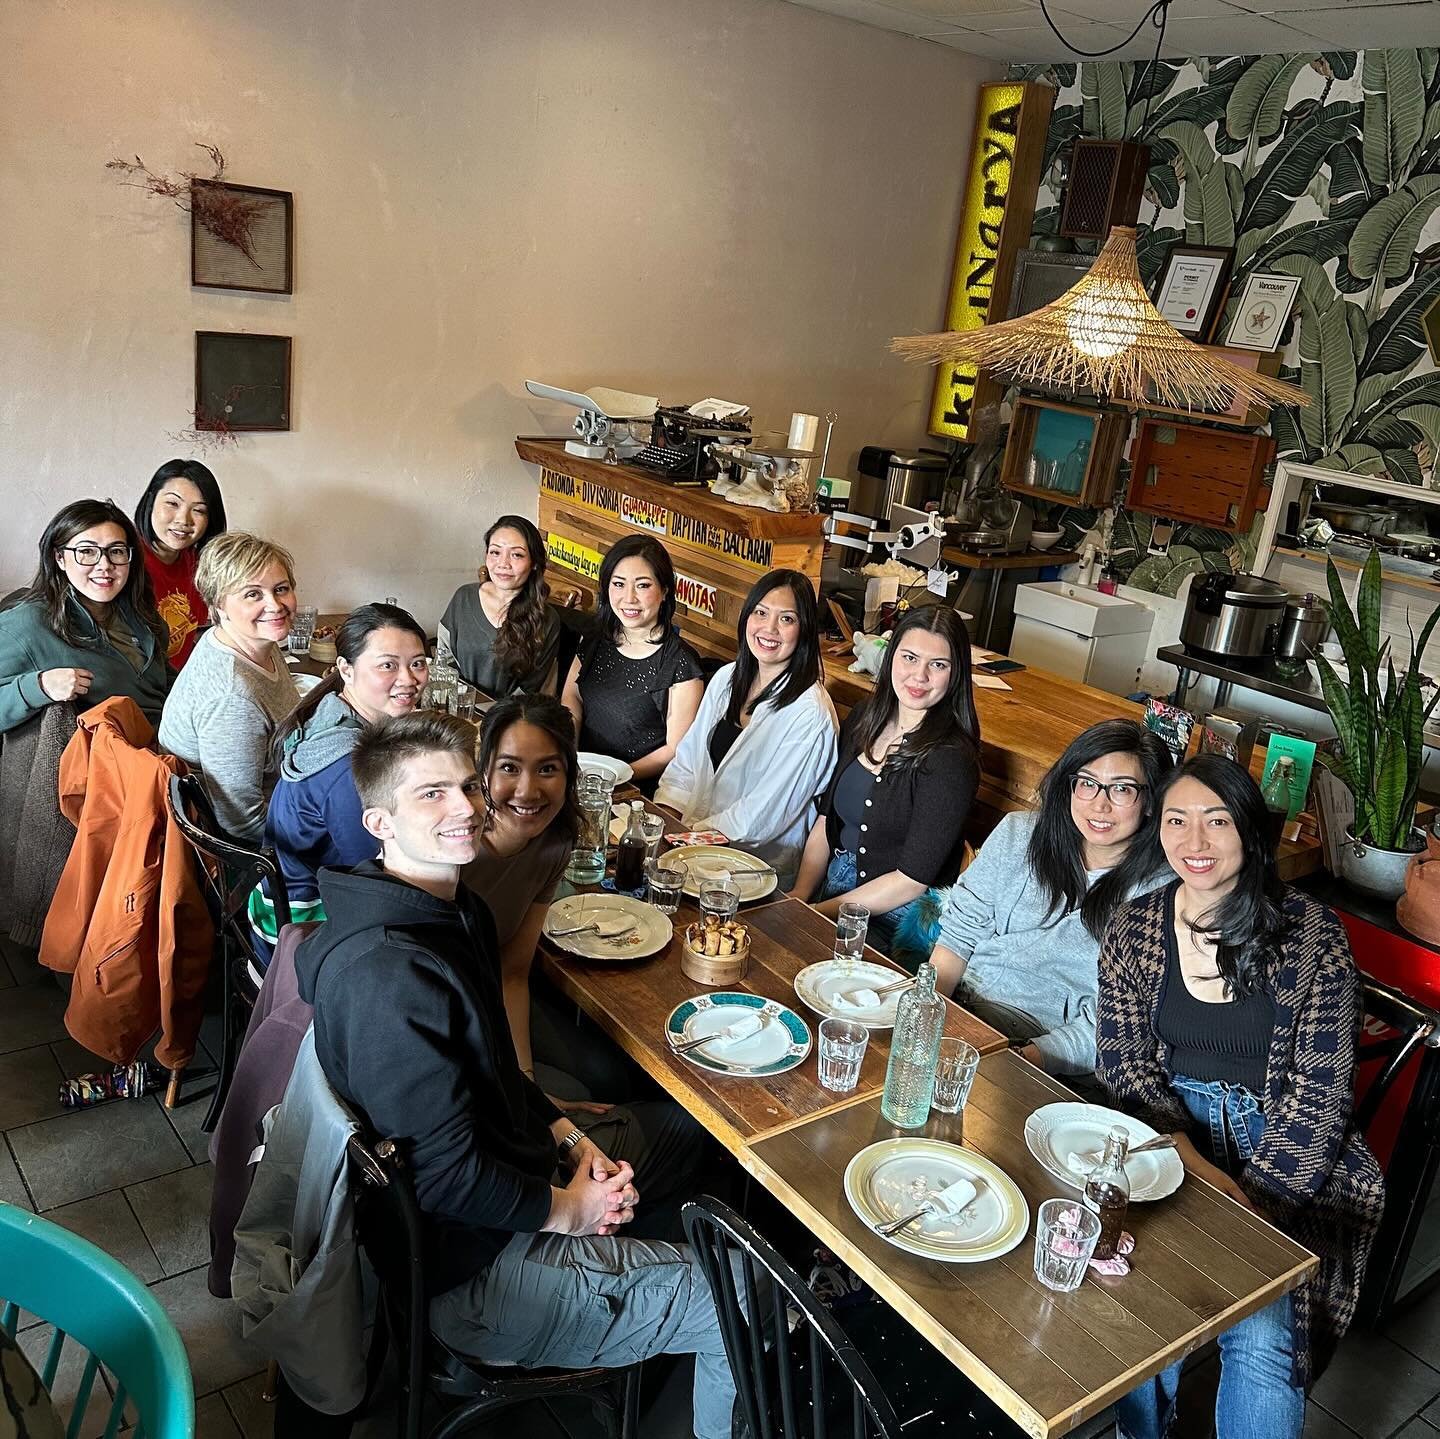 Delicious eats at @kulinaryafilipinoeatery in Coquitlam for our @bcdumplingfest committee kicks off dinner! Thankful for this amazing group of people who are dedicating their time into helping plan this event! 

#bcdumplingfest #asianartsandcultureso